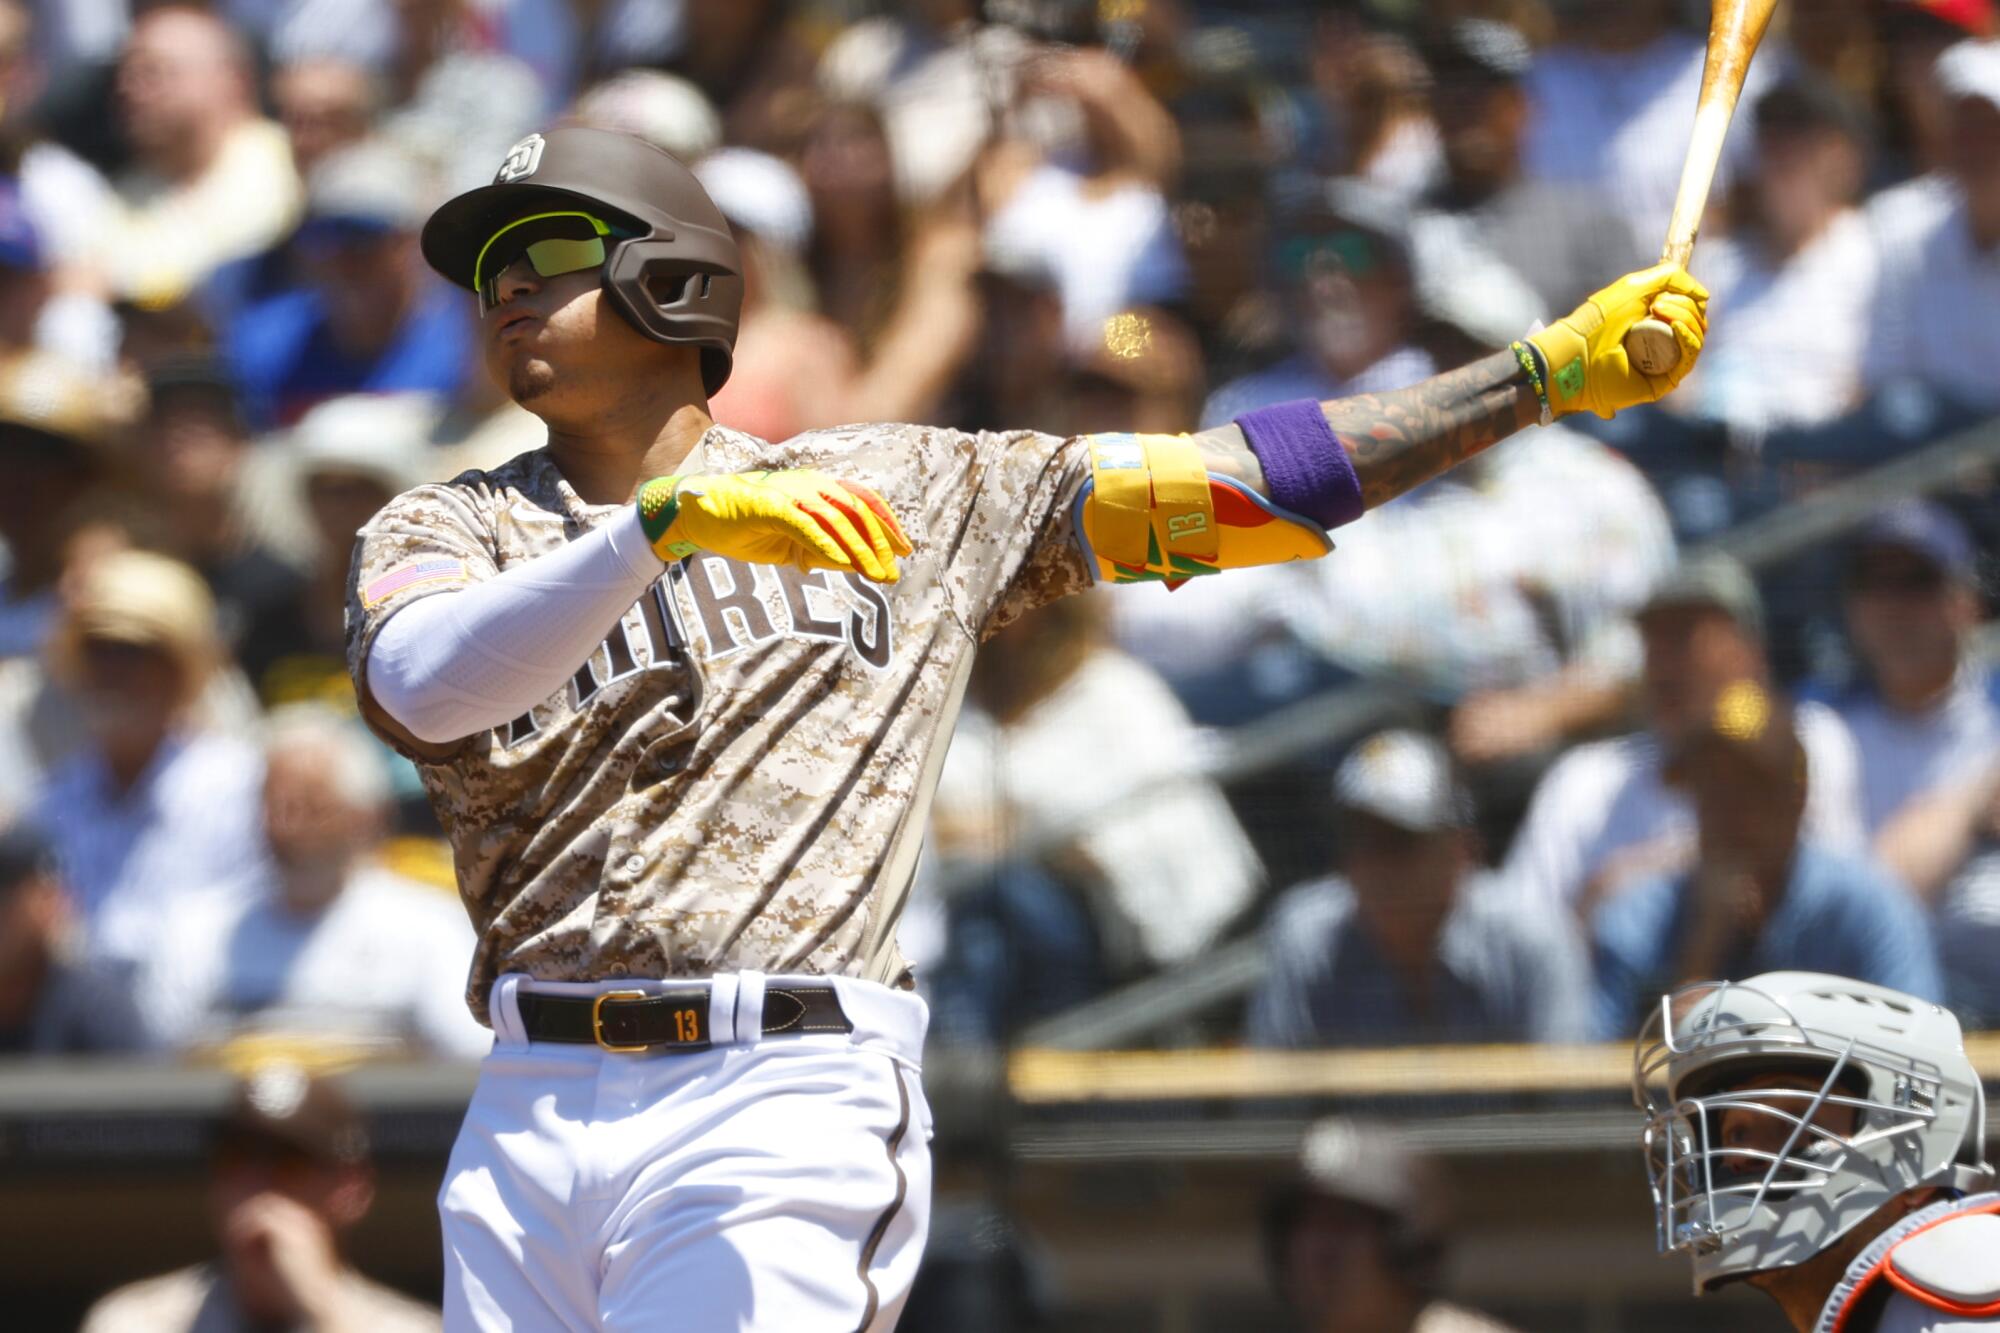 Manny Machado homers twice as Padres close out first half with